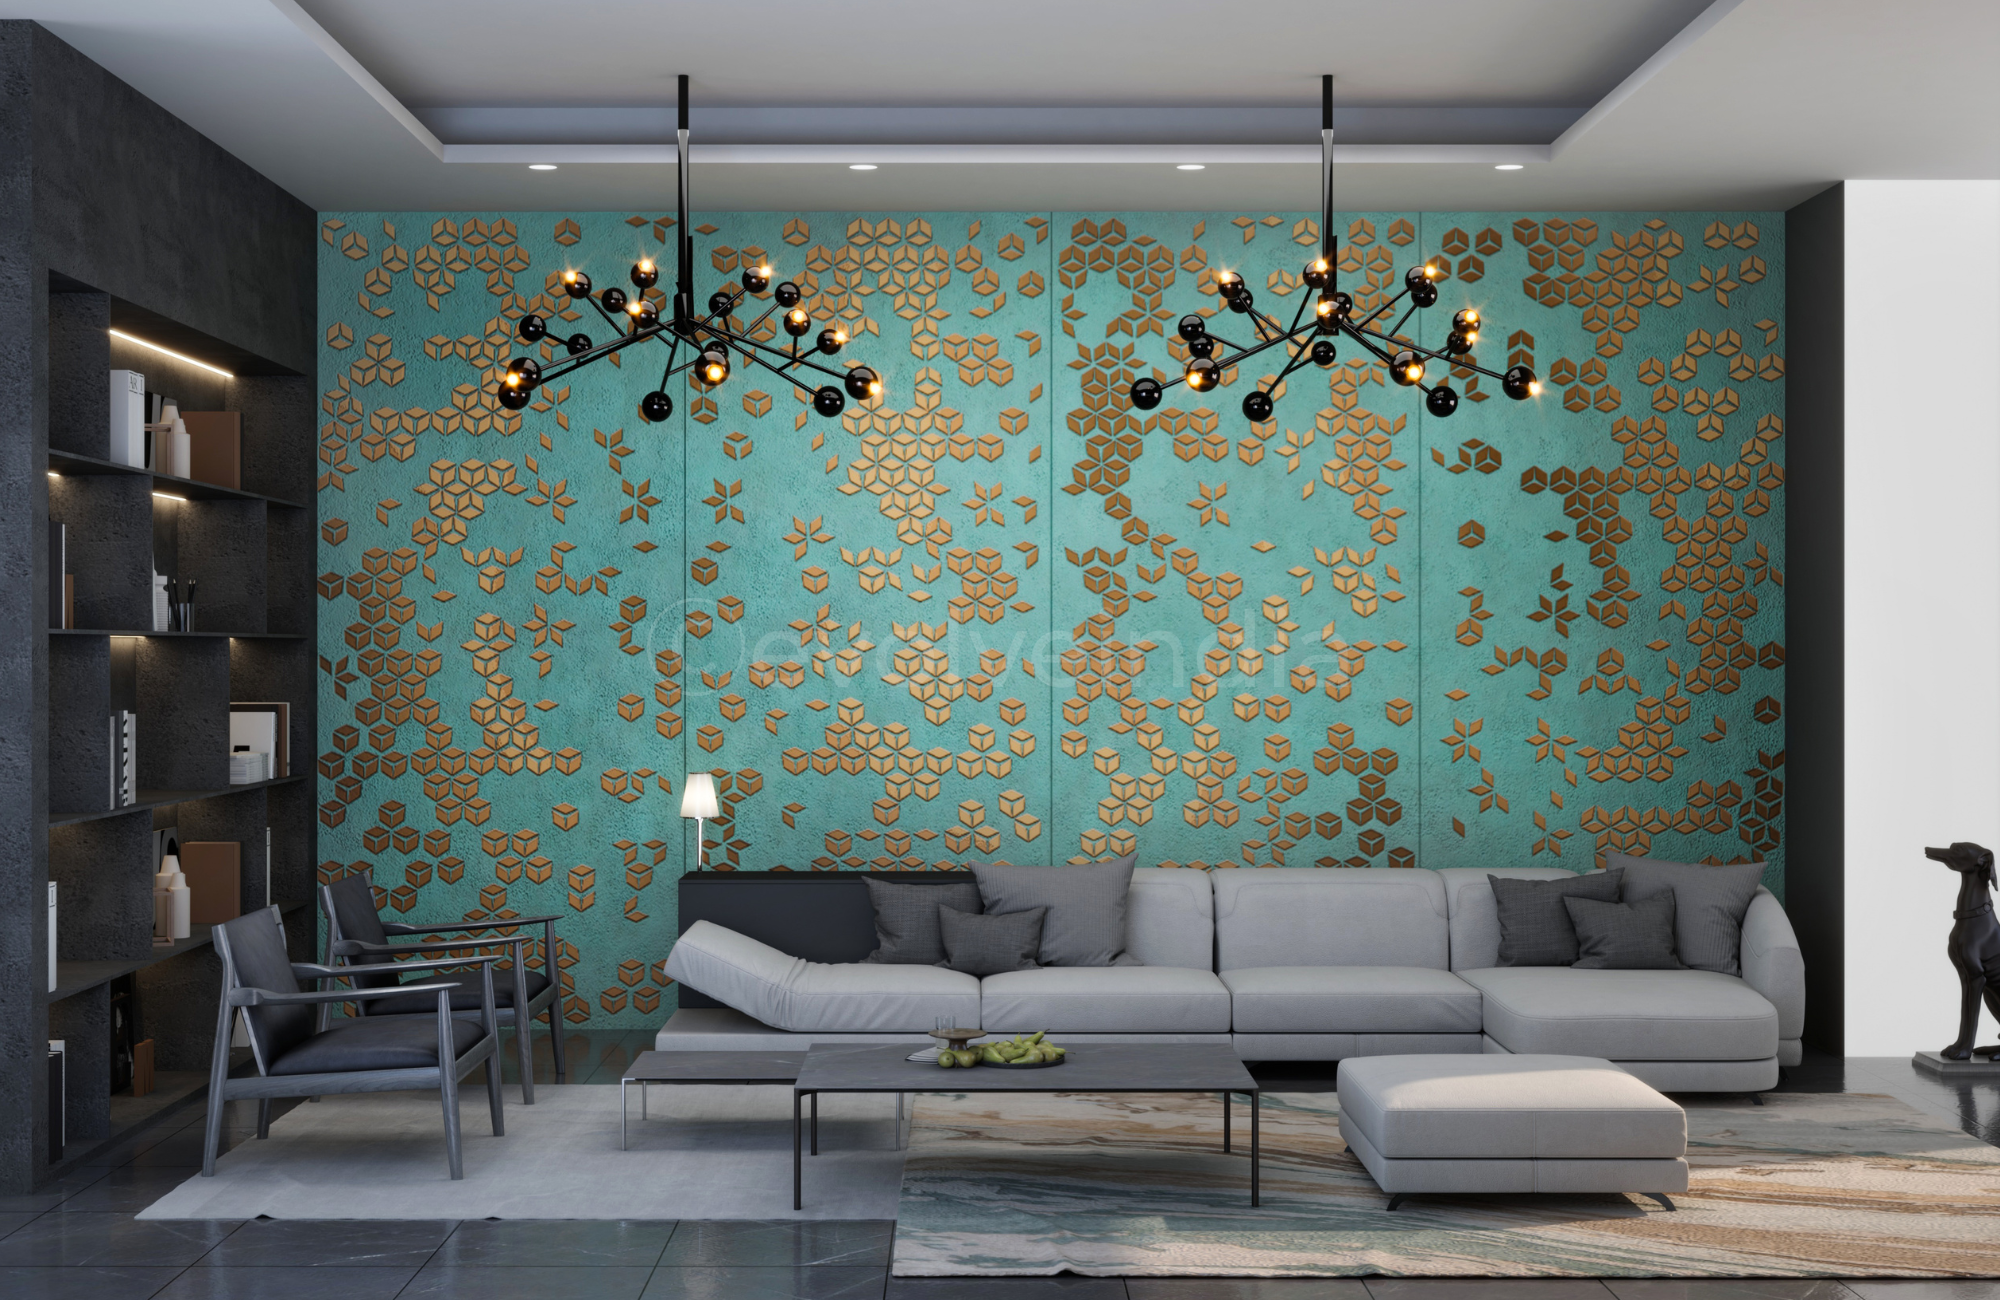 Aquilone-Copper-Patina-Accent-Wall-For-A-New-York-Apartments-Living-Room.png